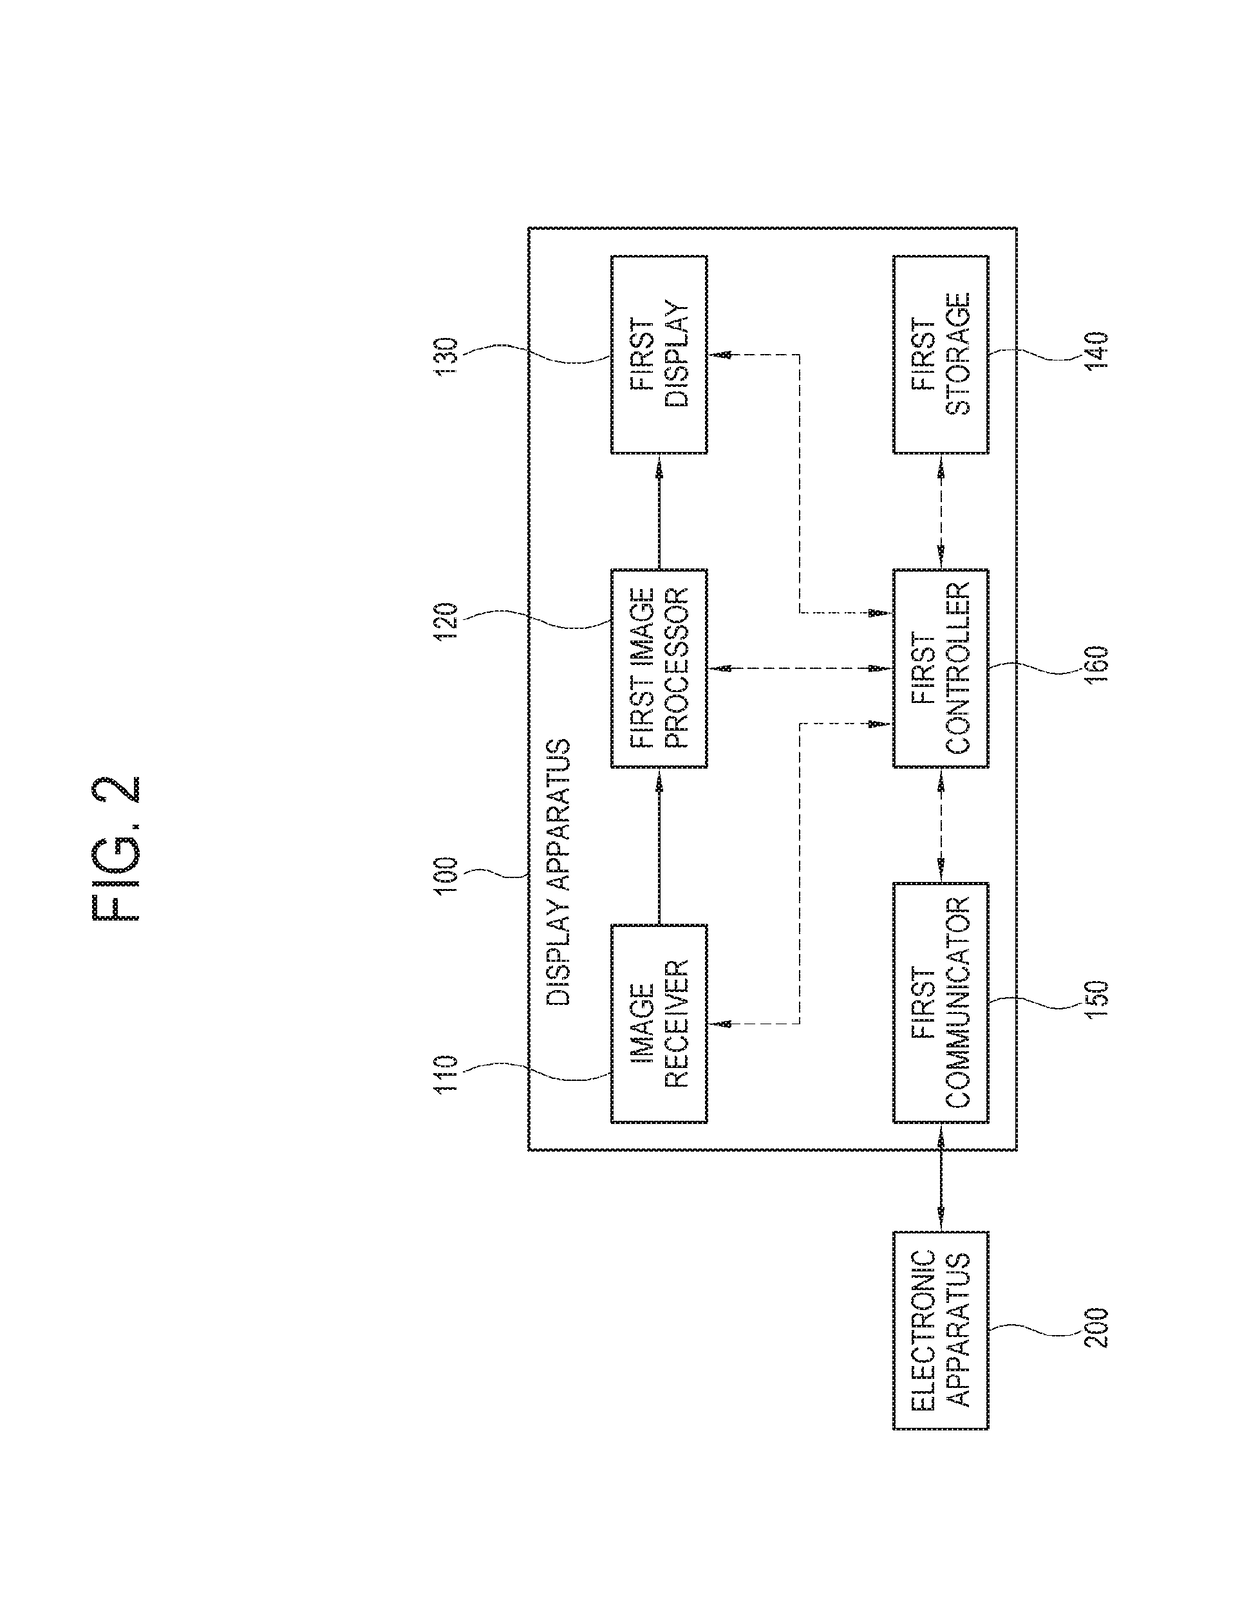 Electronic apparatus, control method thereof and computer program product using the same